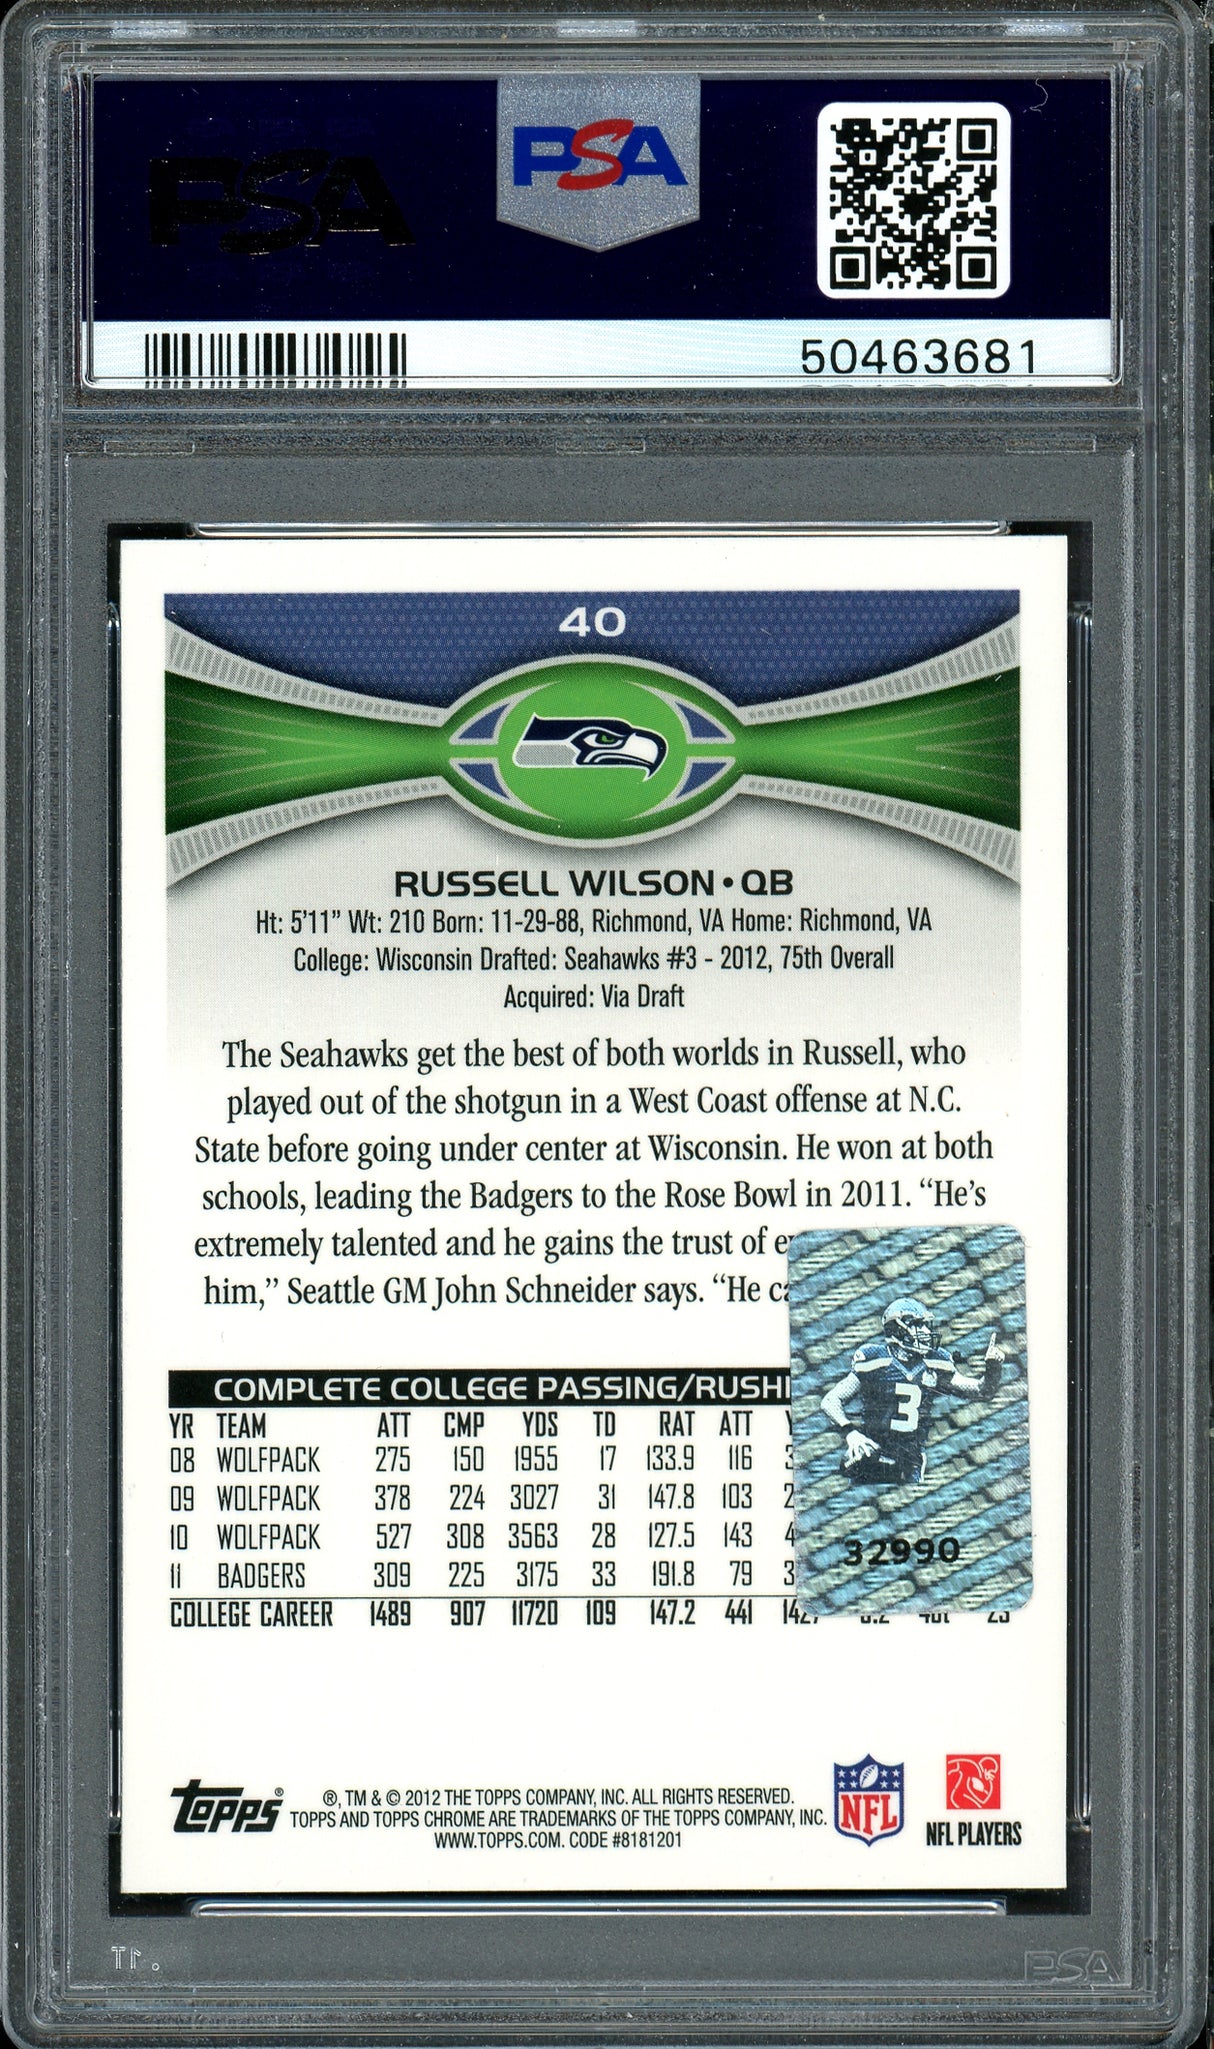 Russell Wilson Autographed 2012 Topps Chrome Rookie Card #40 Seattle Seahawks Card Grade NM-MT 8 PSA/DNA #50463681